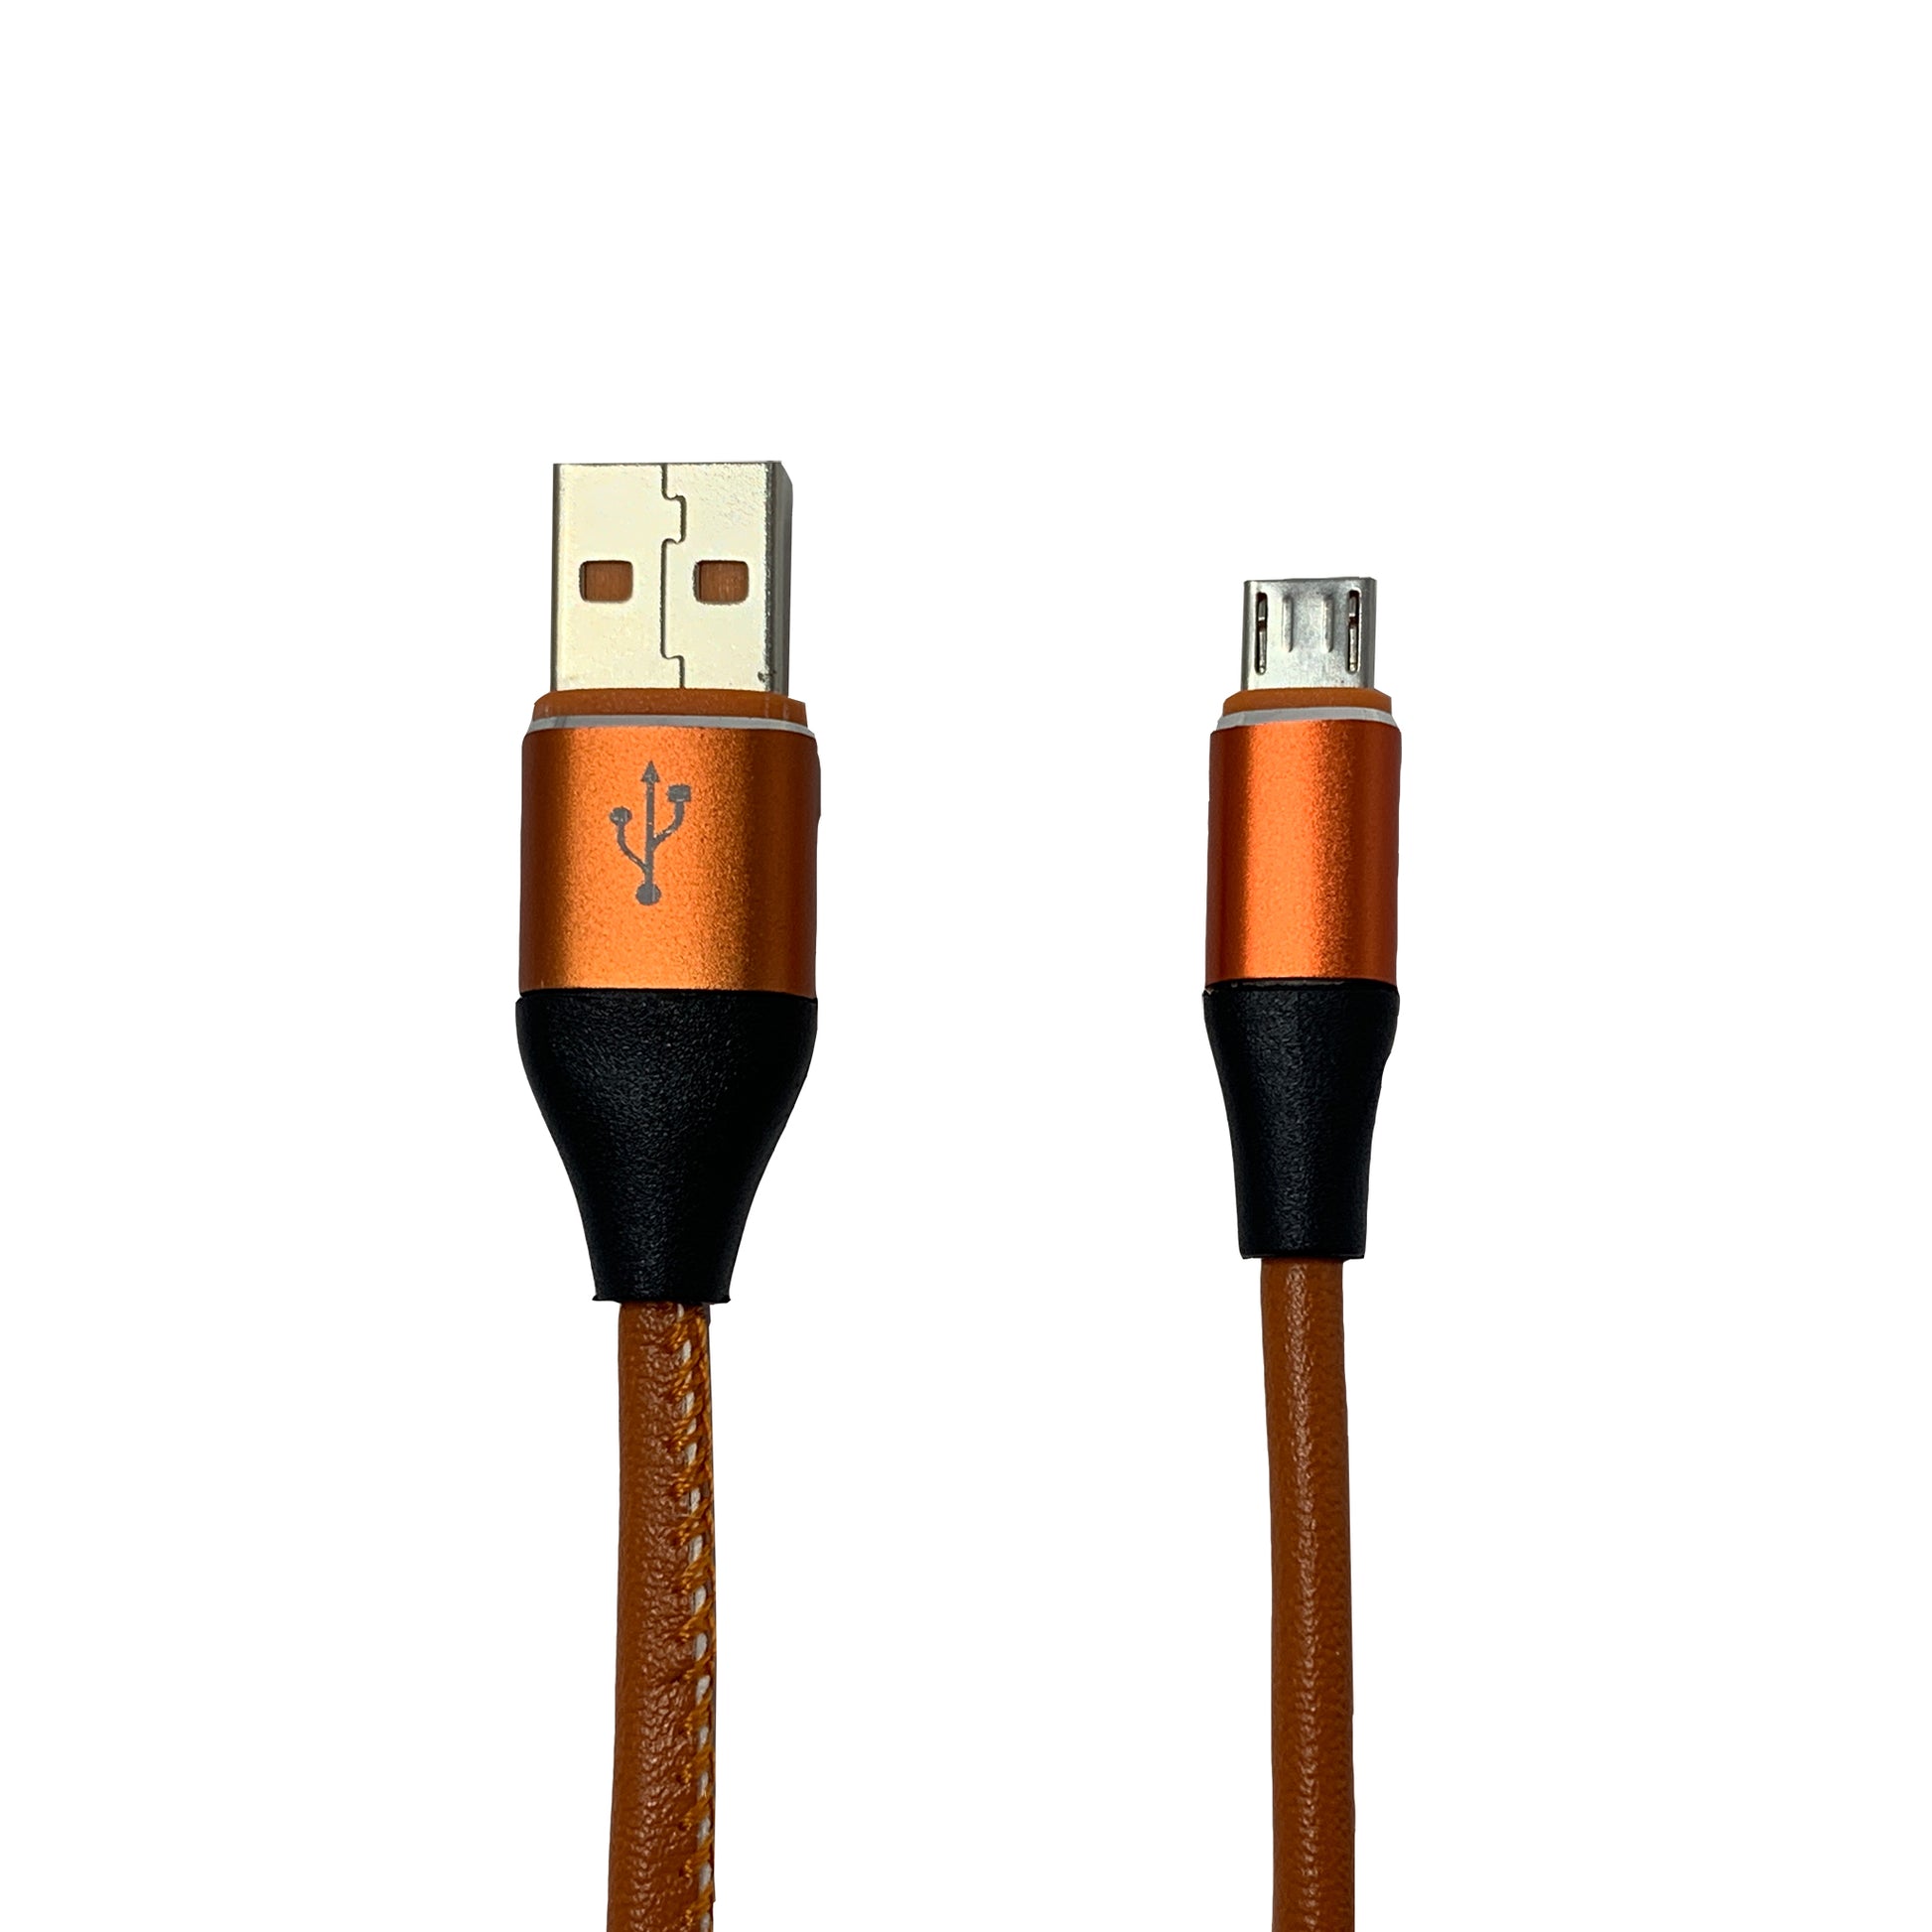 MOTTO] Leather Wrapped Type-C Cable – Motto IC